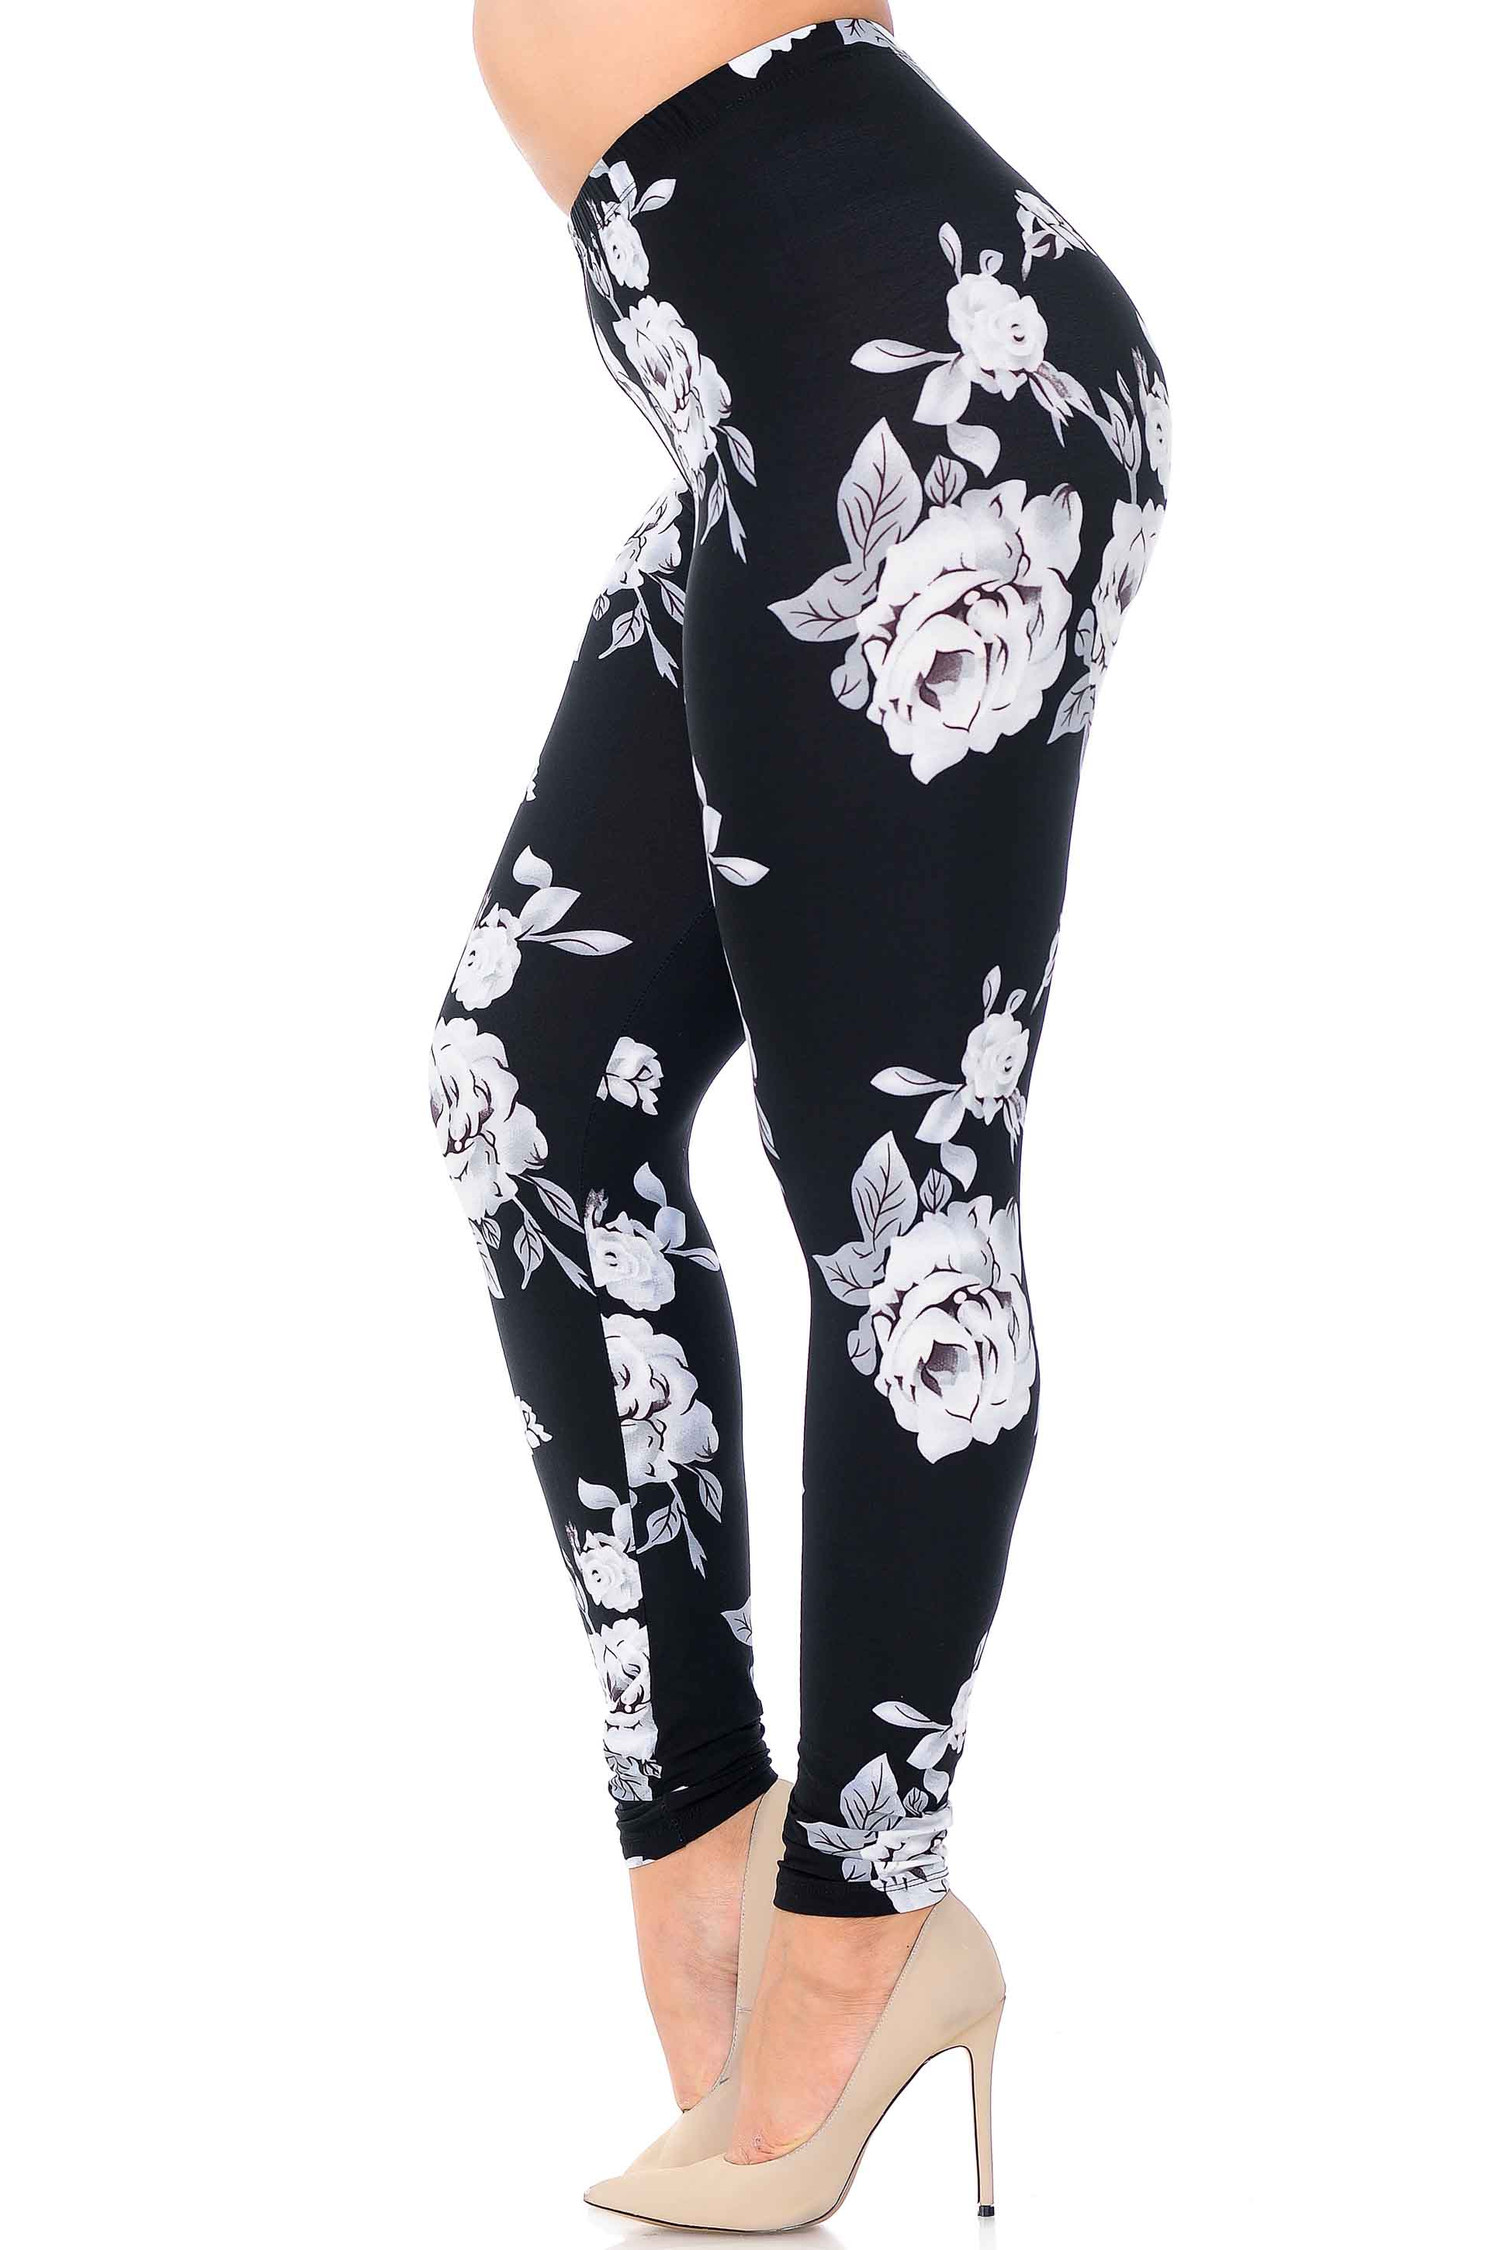 Buttery Smooth Painted Floral Extra Extra Plus Size Leggings - 3X-5X